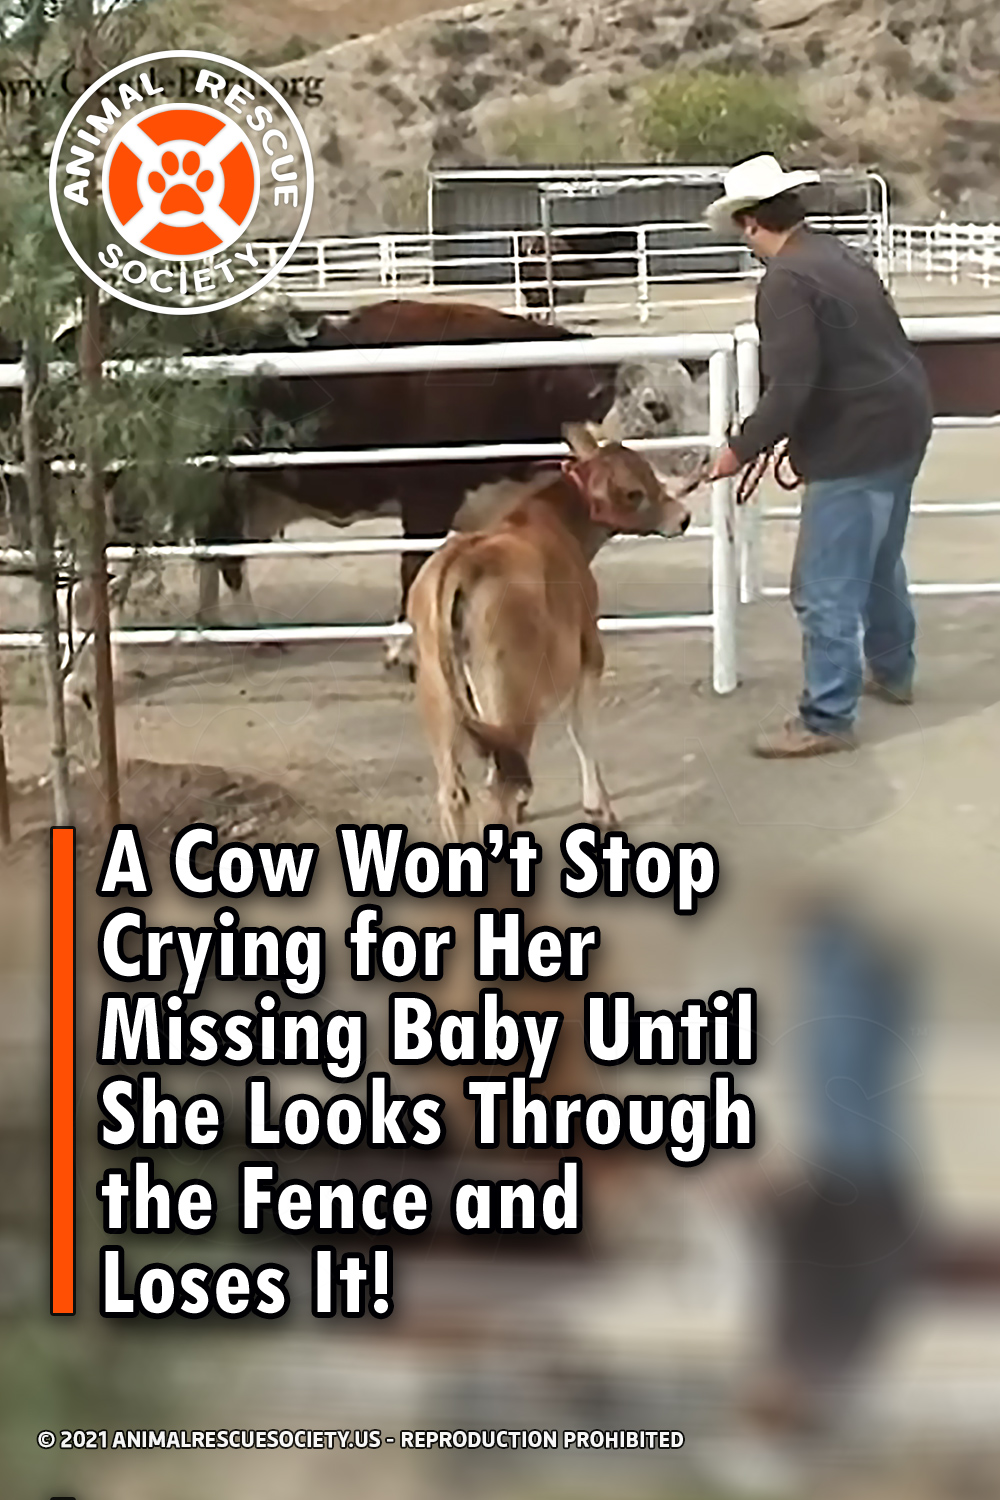 A Cow Won’t Stop Crying for Her Missing Baby Until She Looks Through the Fence and Loses It!